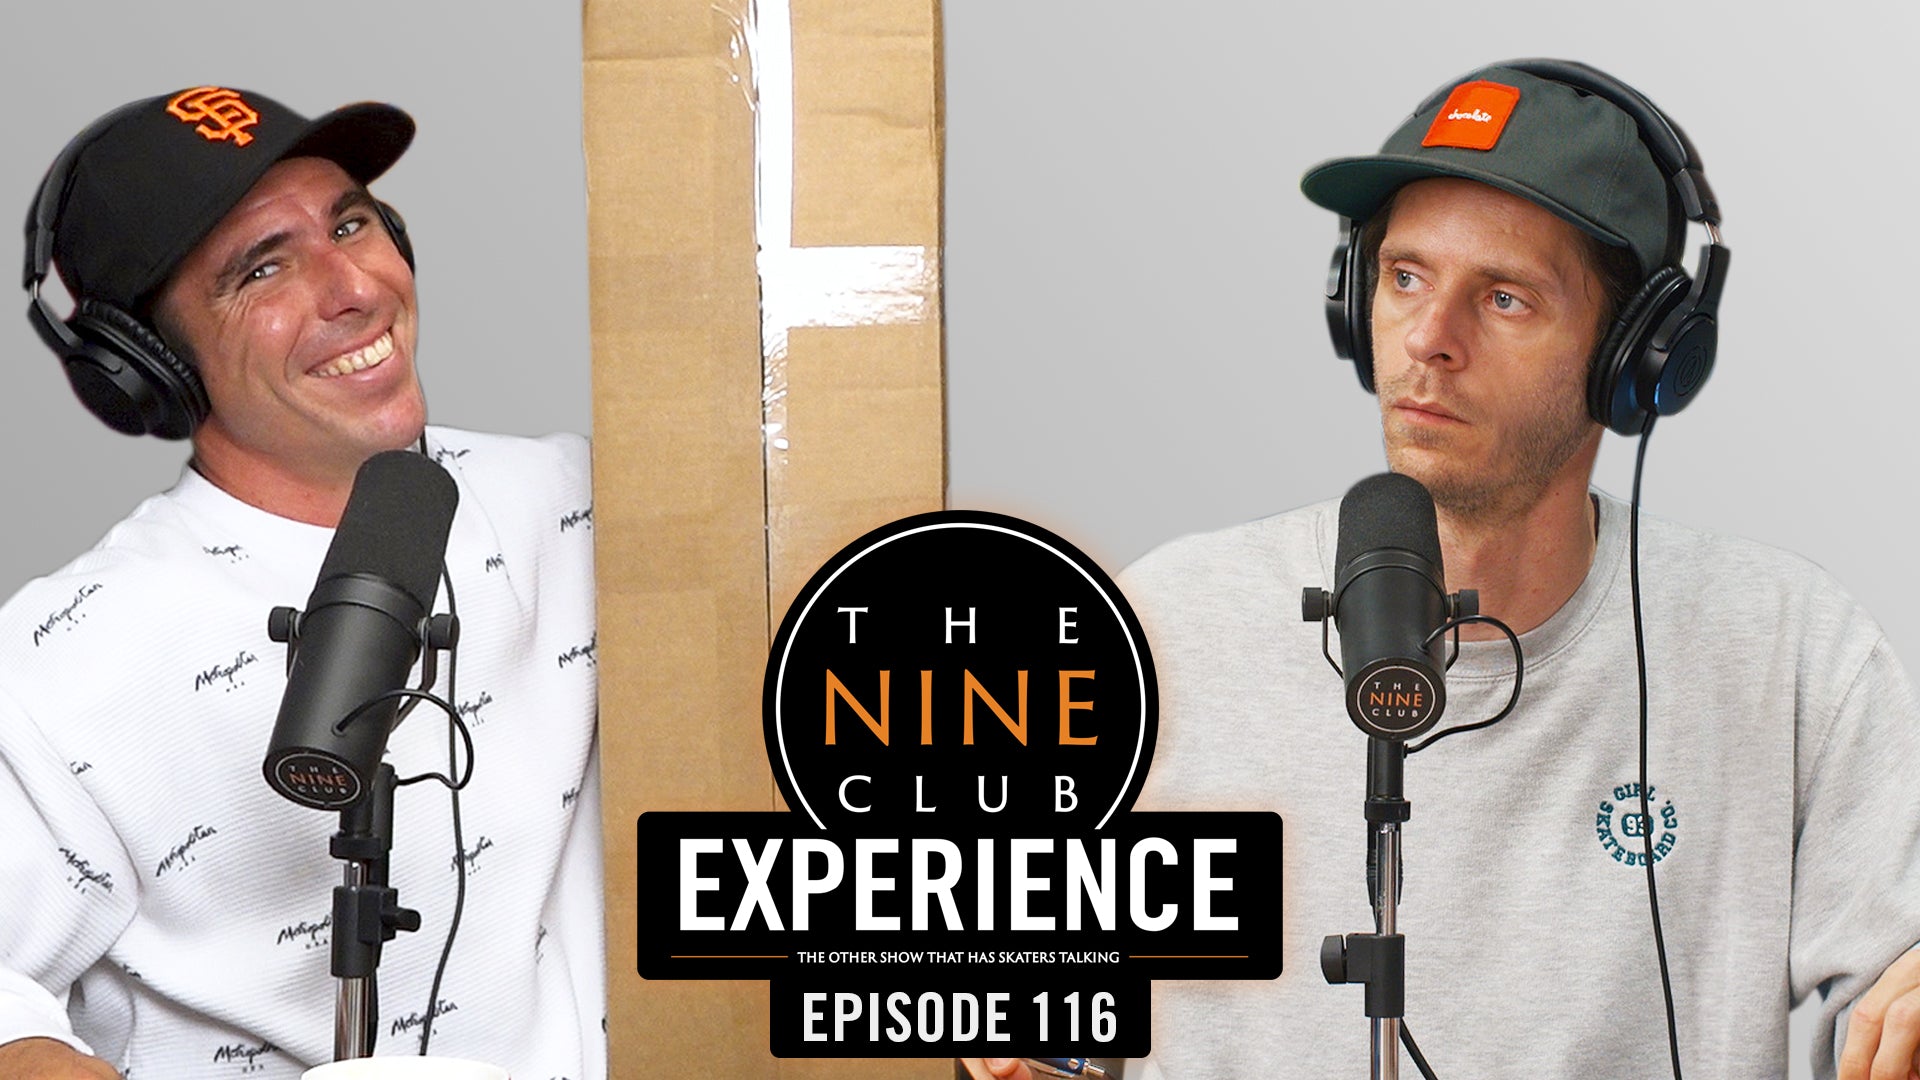 The Nine Club Experience Episode 116